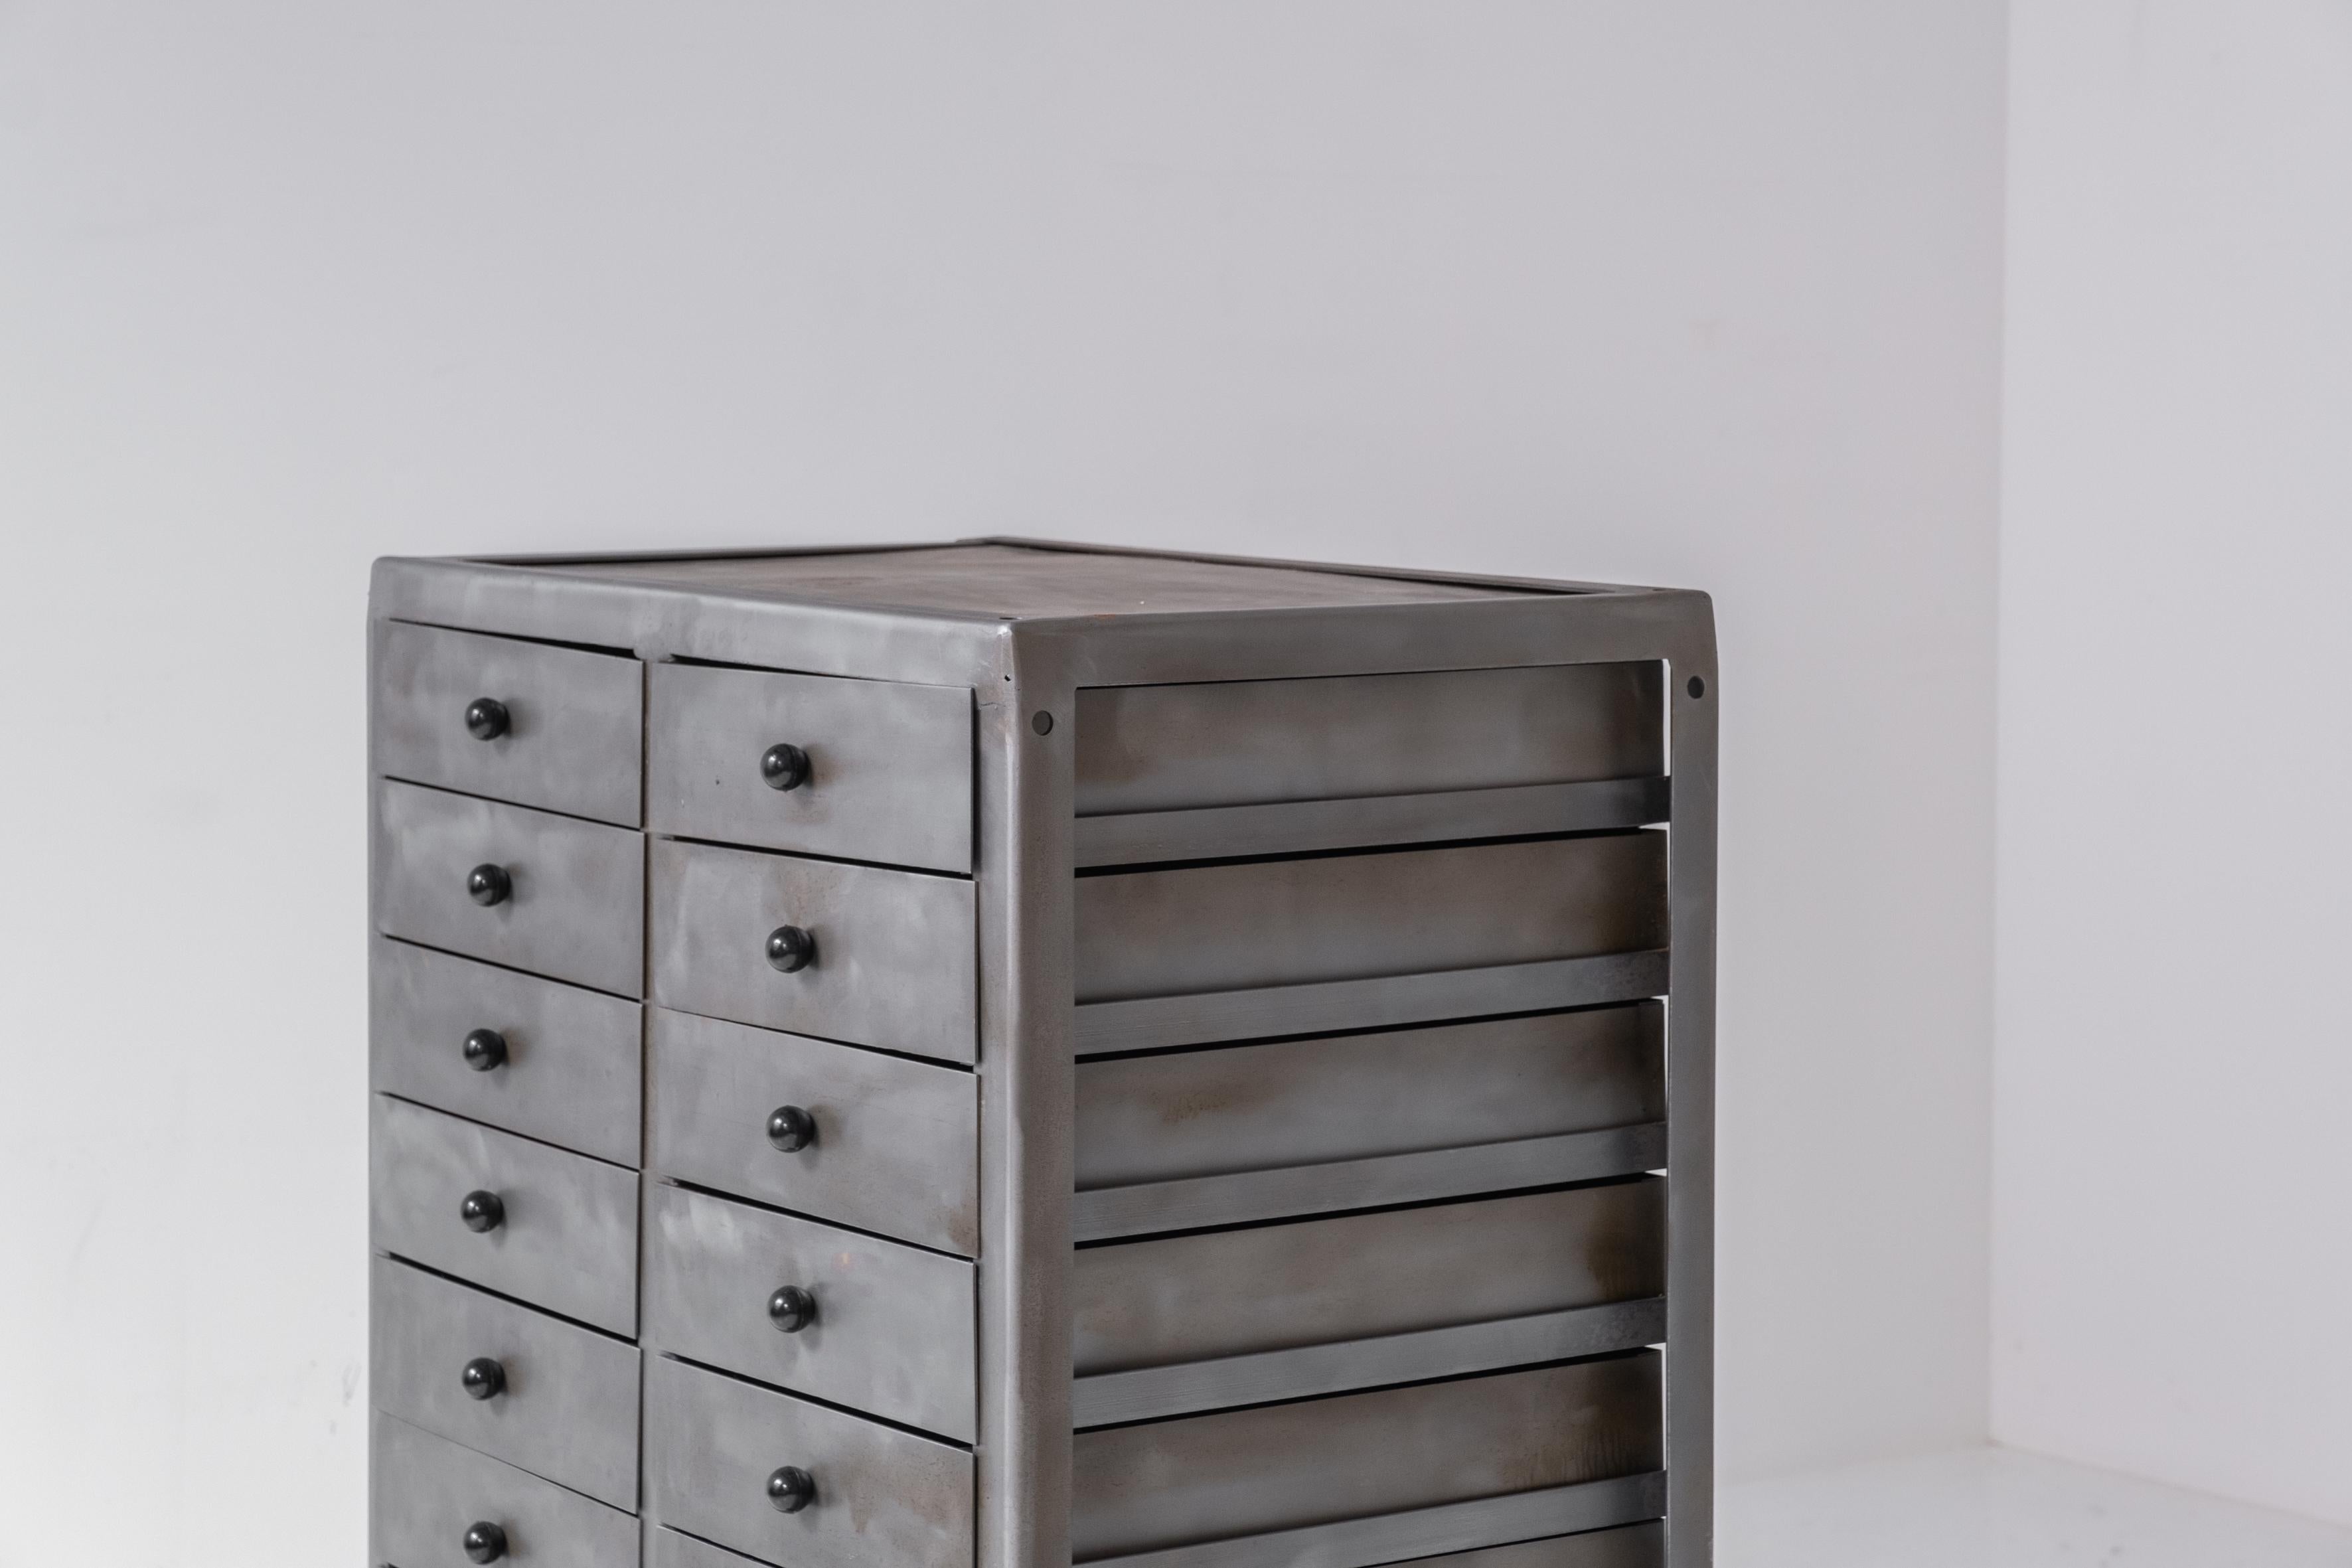 Mid-20th Century Industrial Chest of Drawers Designed in the Netherlands Around the 1960s